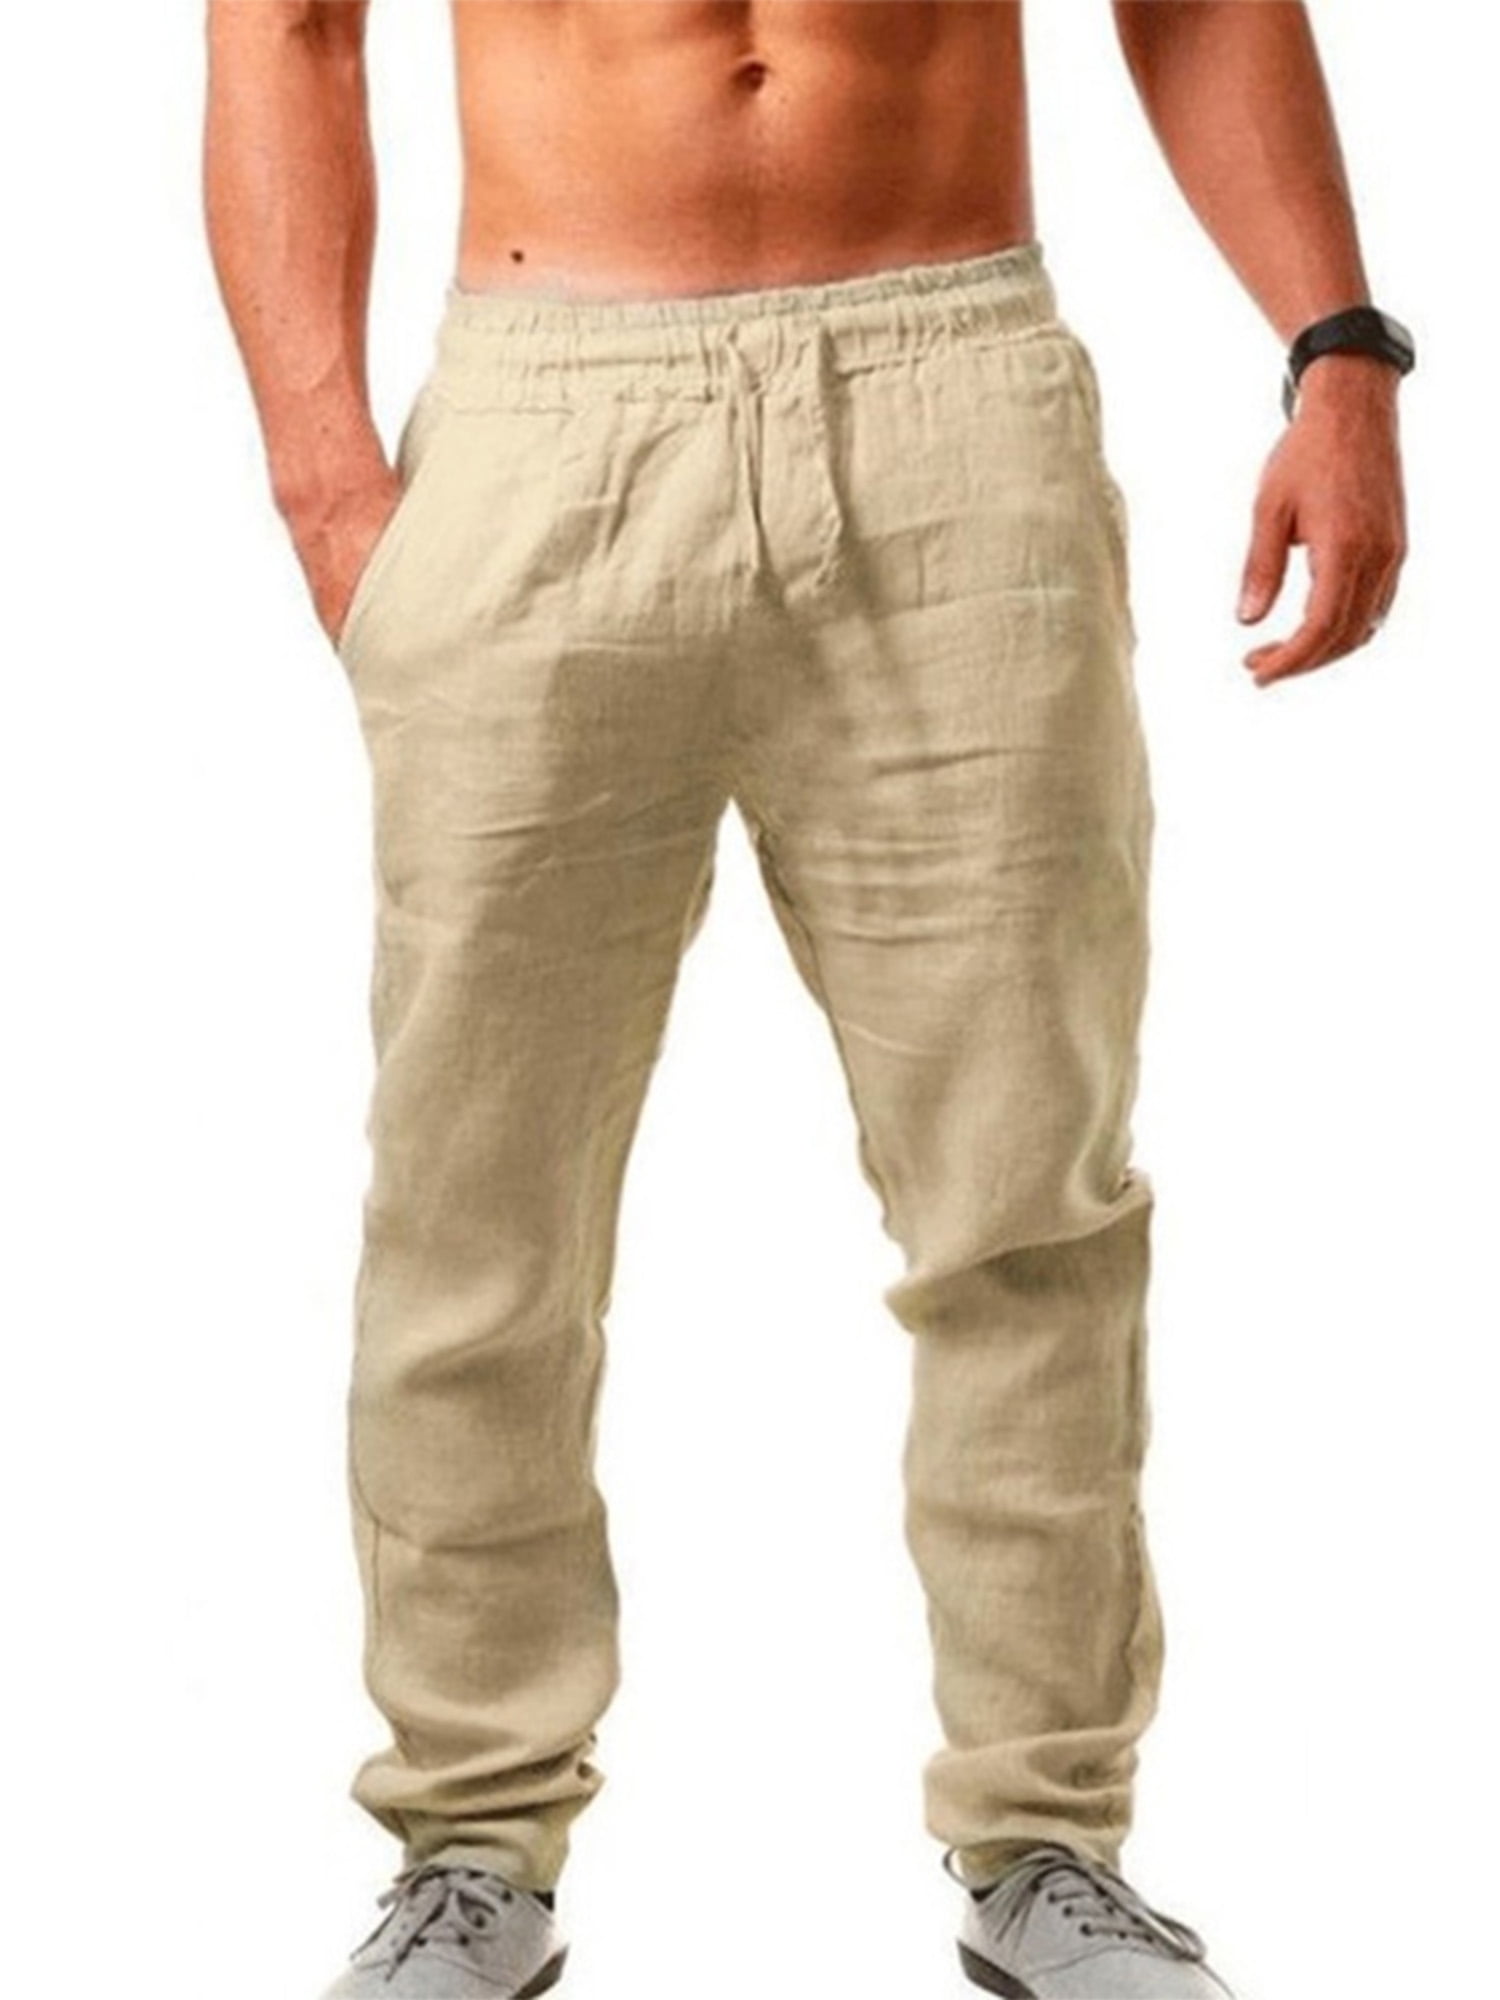 Men's Linen Trousers Drawstring Beach Casual Holiday Yoga Summer Gym Baggy Pants 